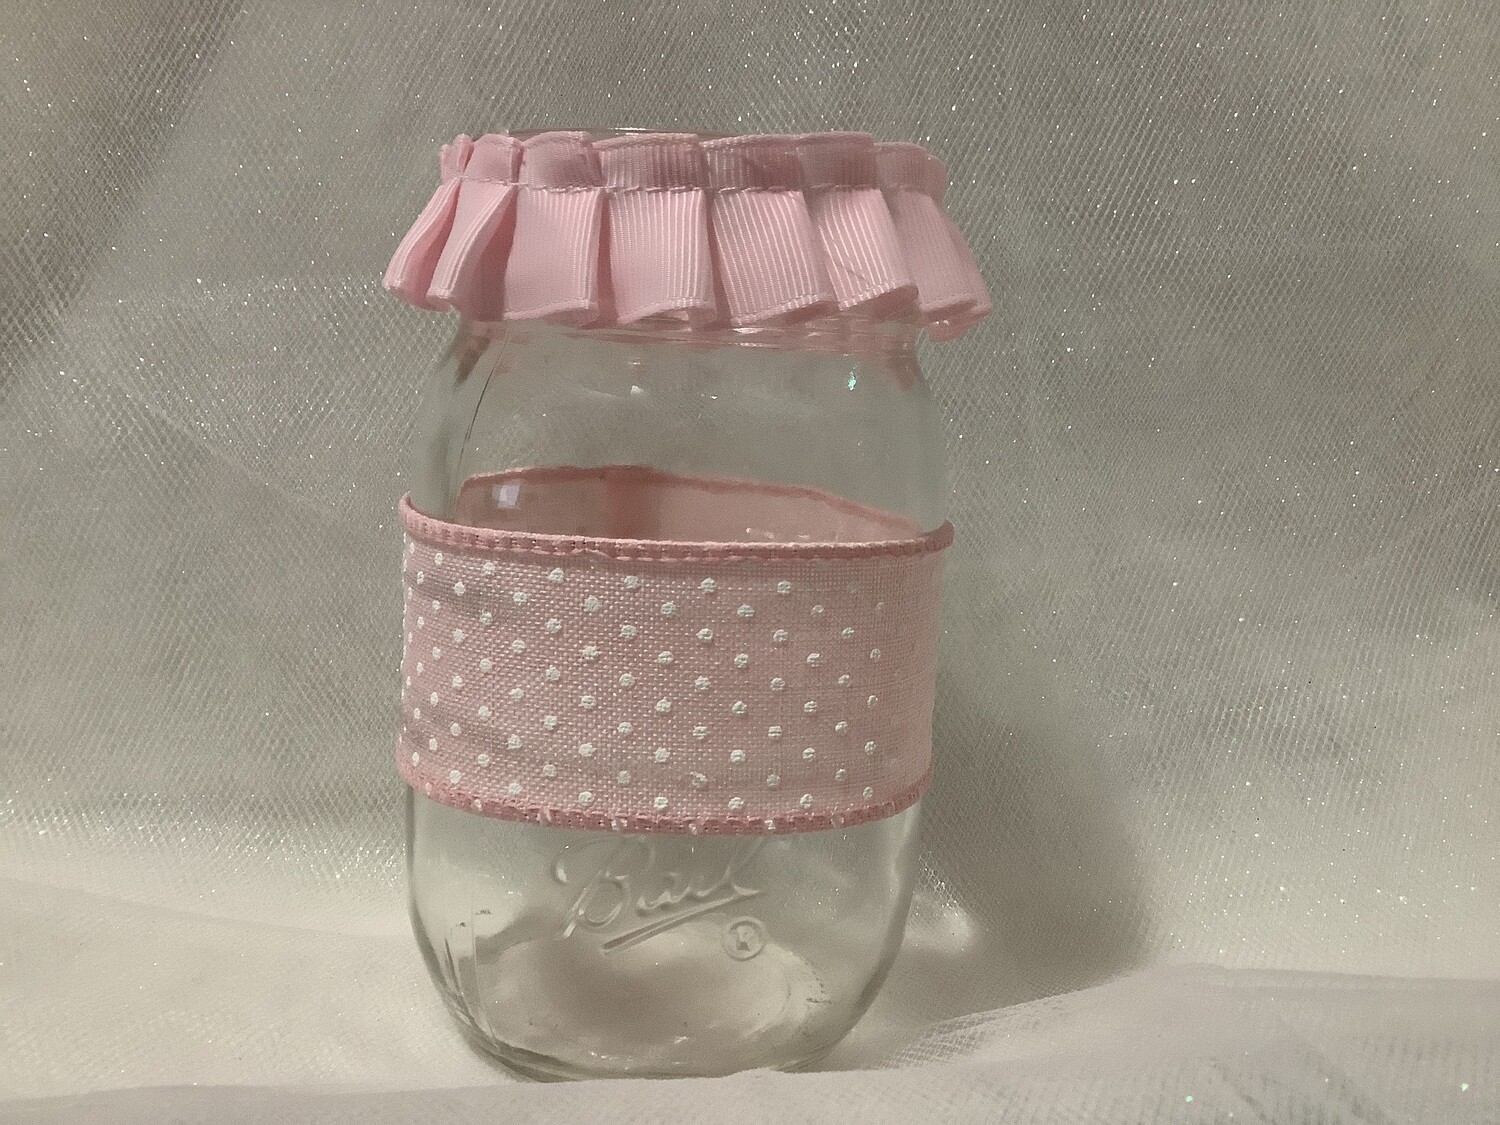 Unpainted jar with ribbon & lace